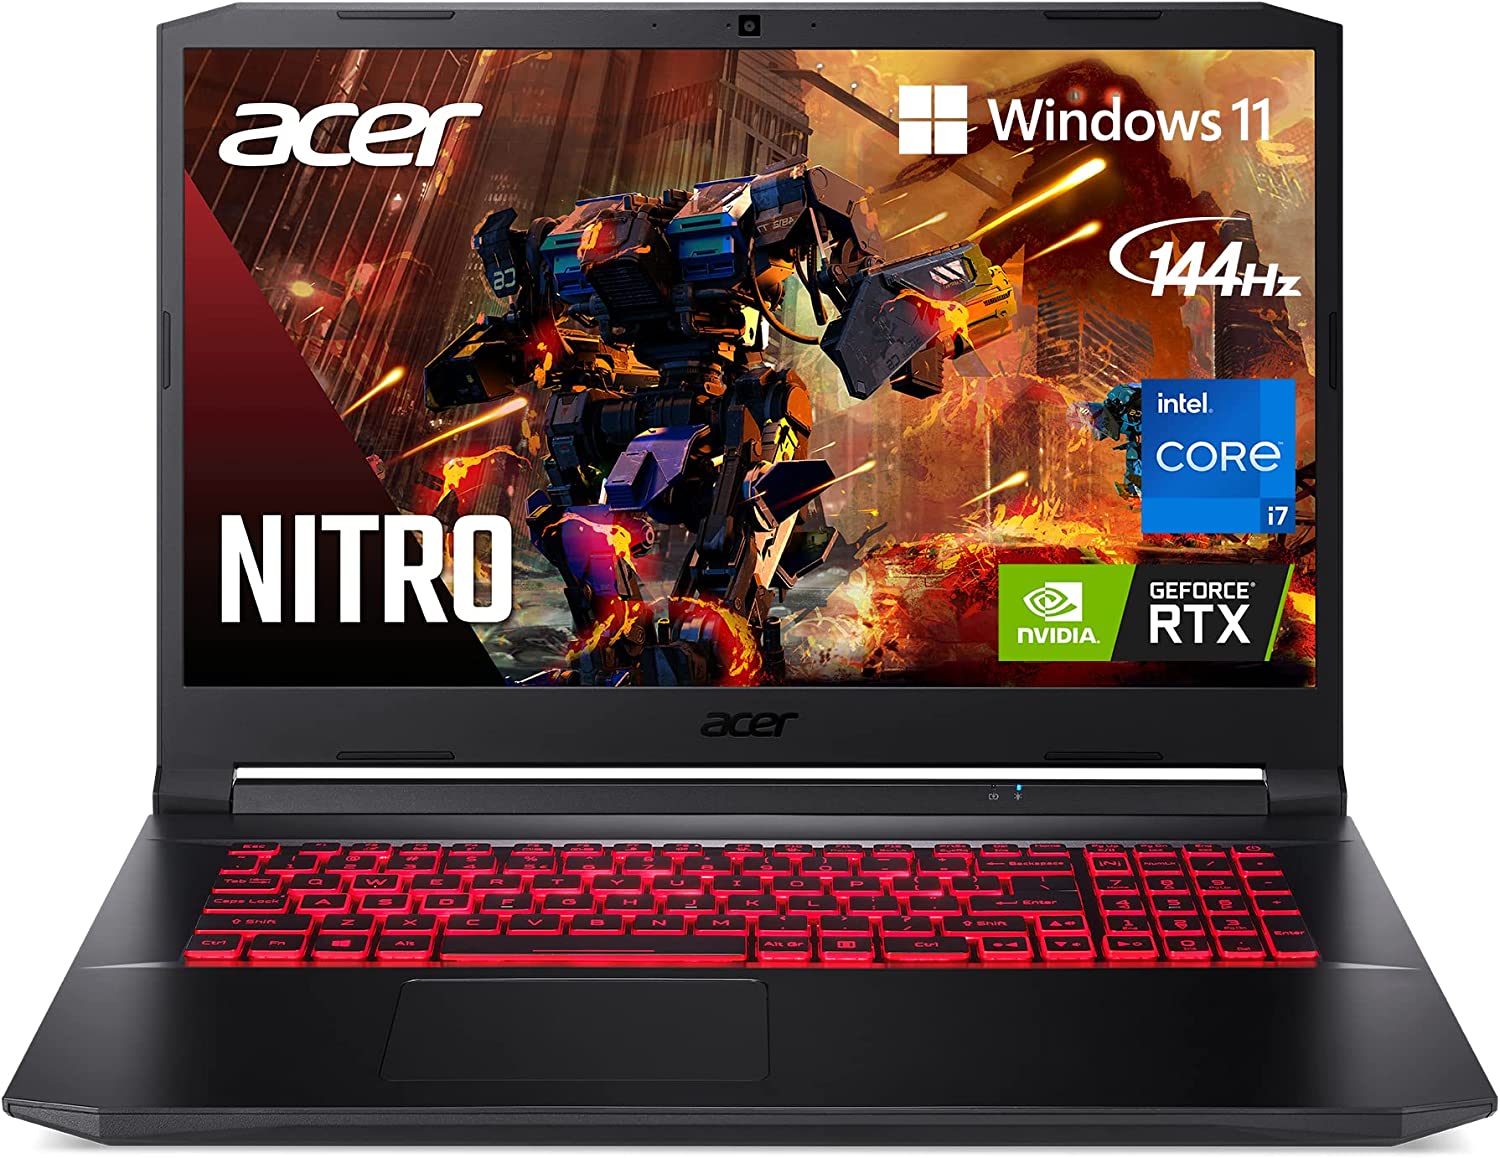 Top 5 Best Gaming Laptops with Numeric Keypads - Acer Nitro 5